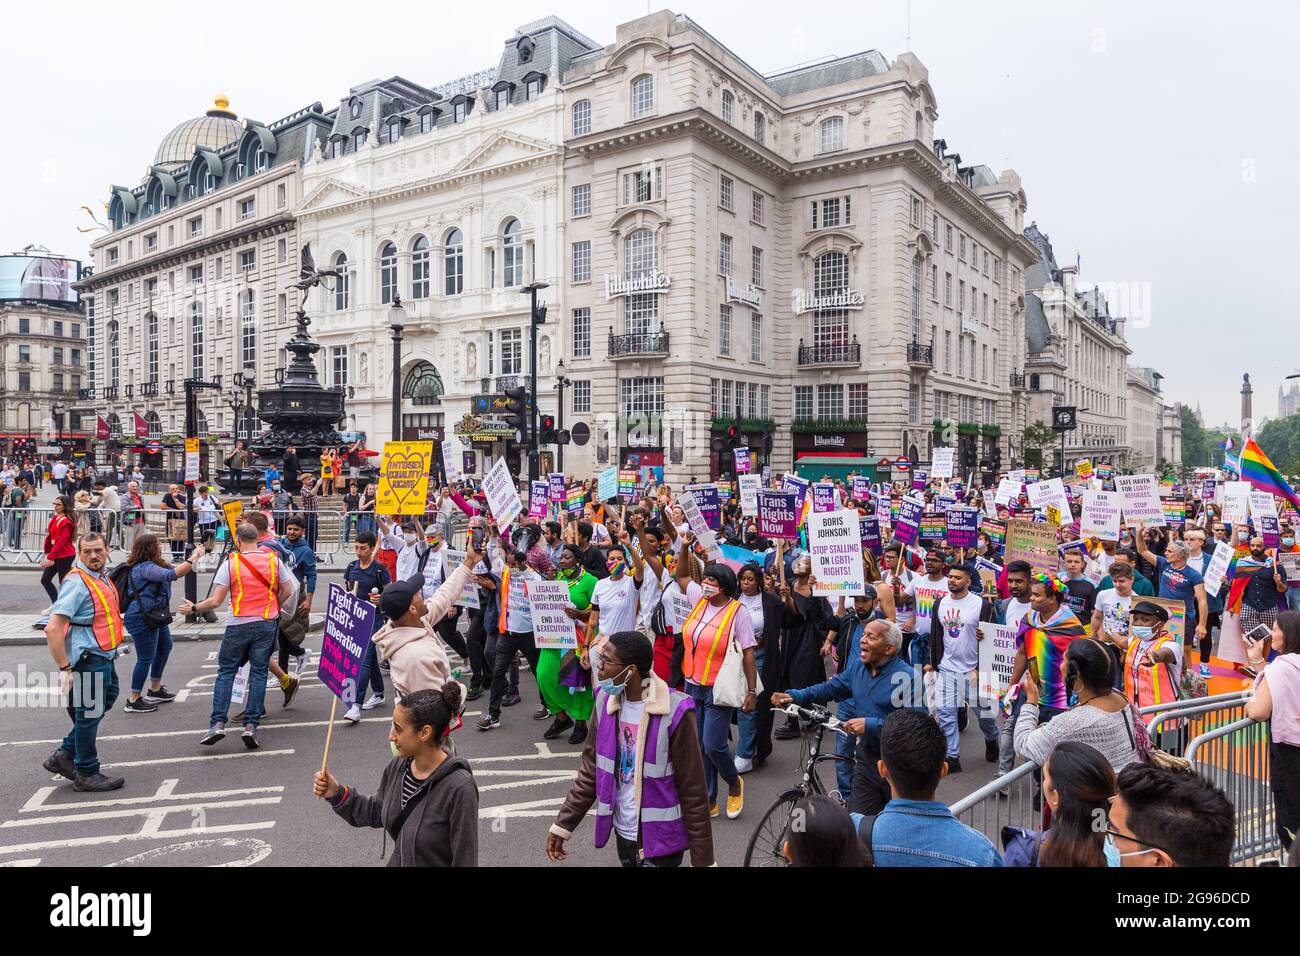 Reclaim pride protest, London, organised by Peter Tatchell Stock Photo